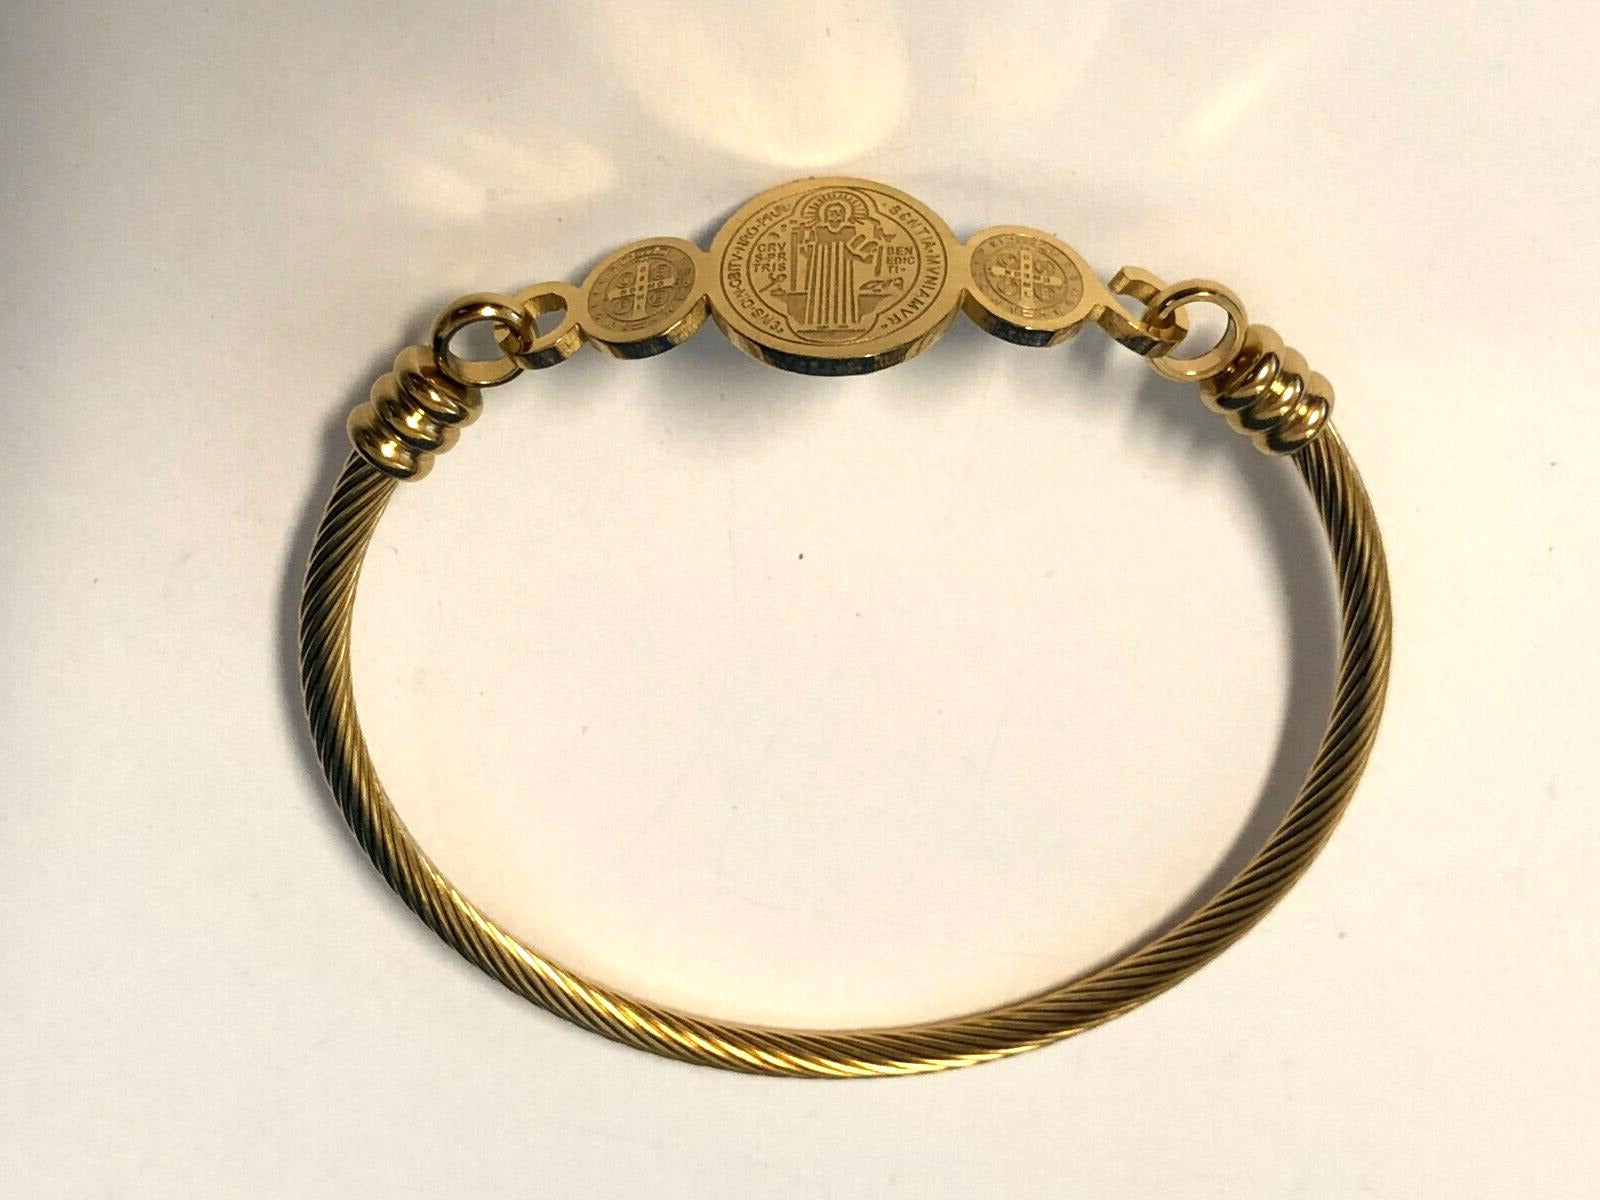 Saint Benedict Medal on Gold or Silver Bangle Bracelet, New - Bob and Penny Lord